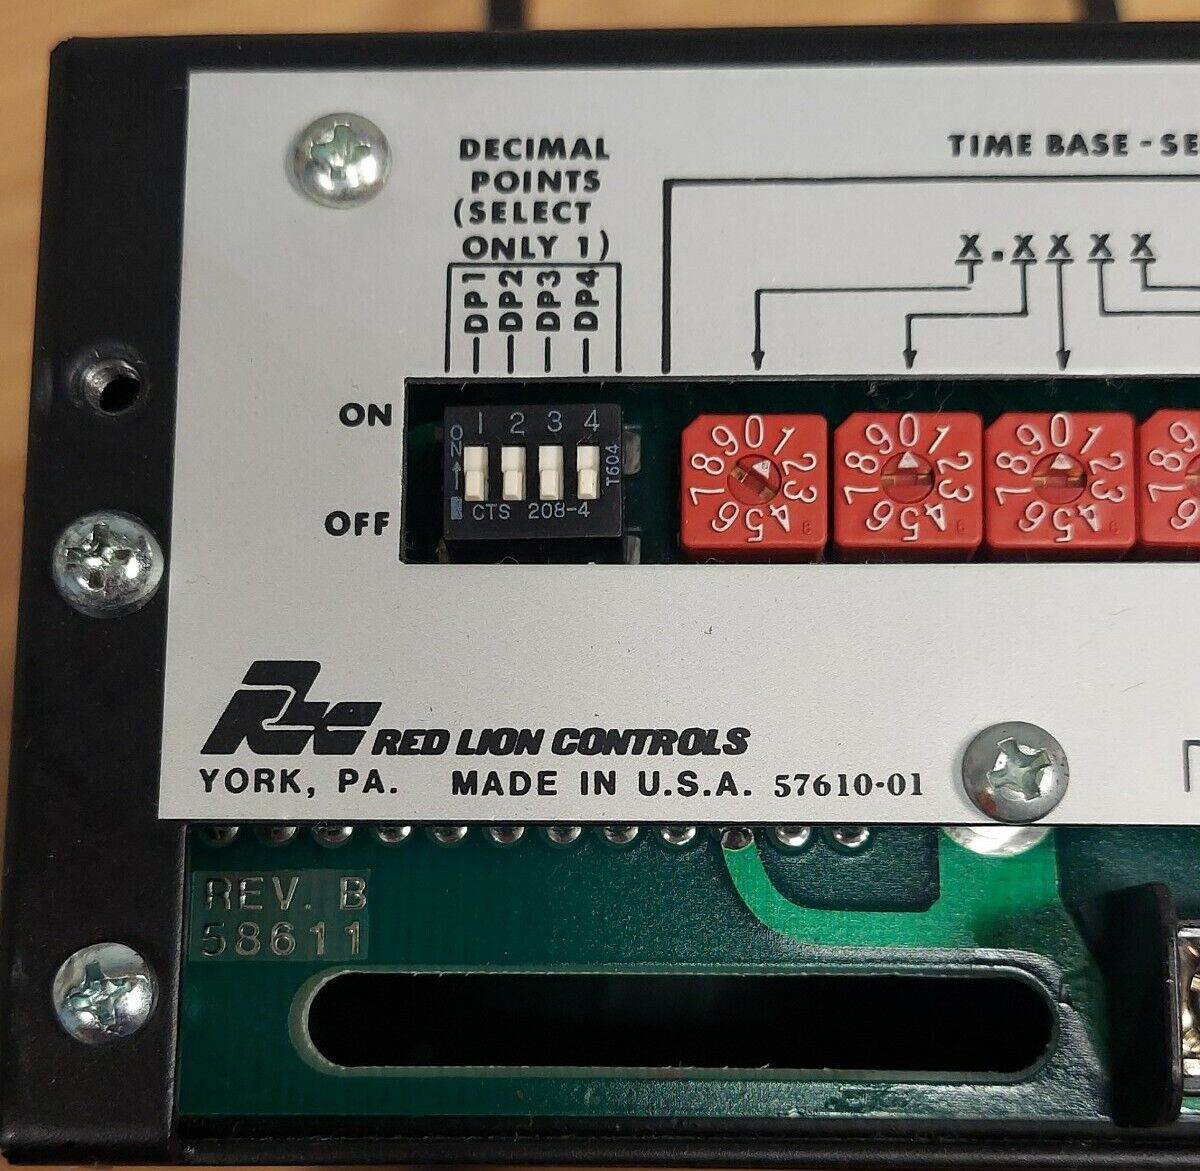 Red Lion Controls Series 600 Four Digit RPM Counter (RE235)